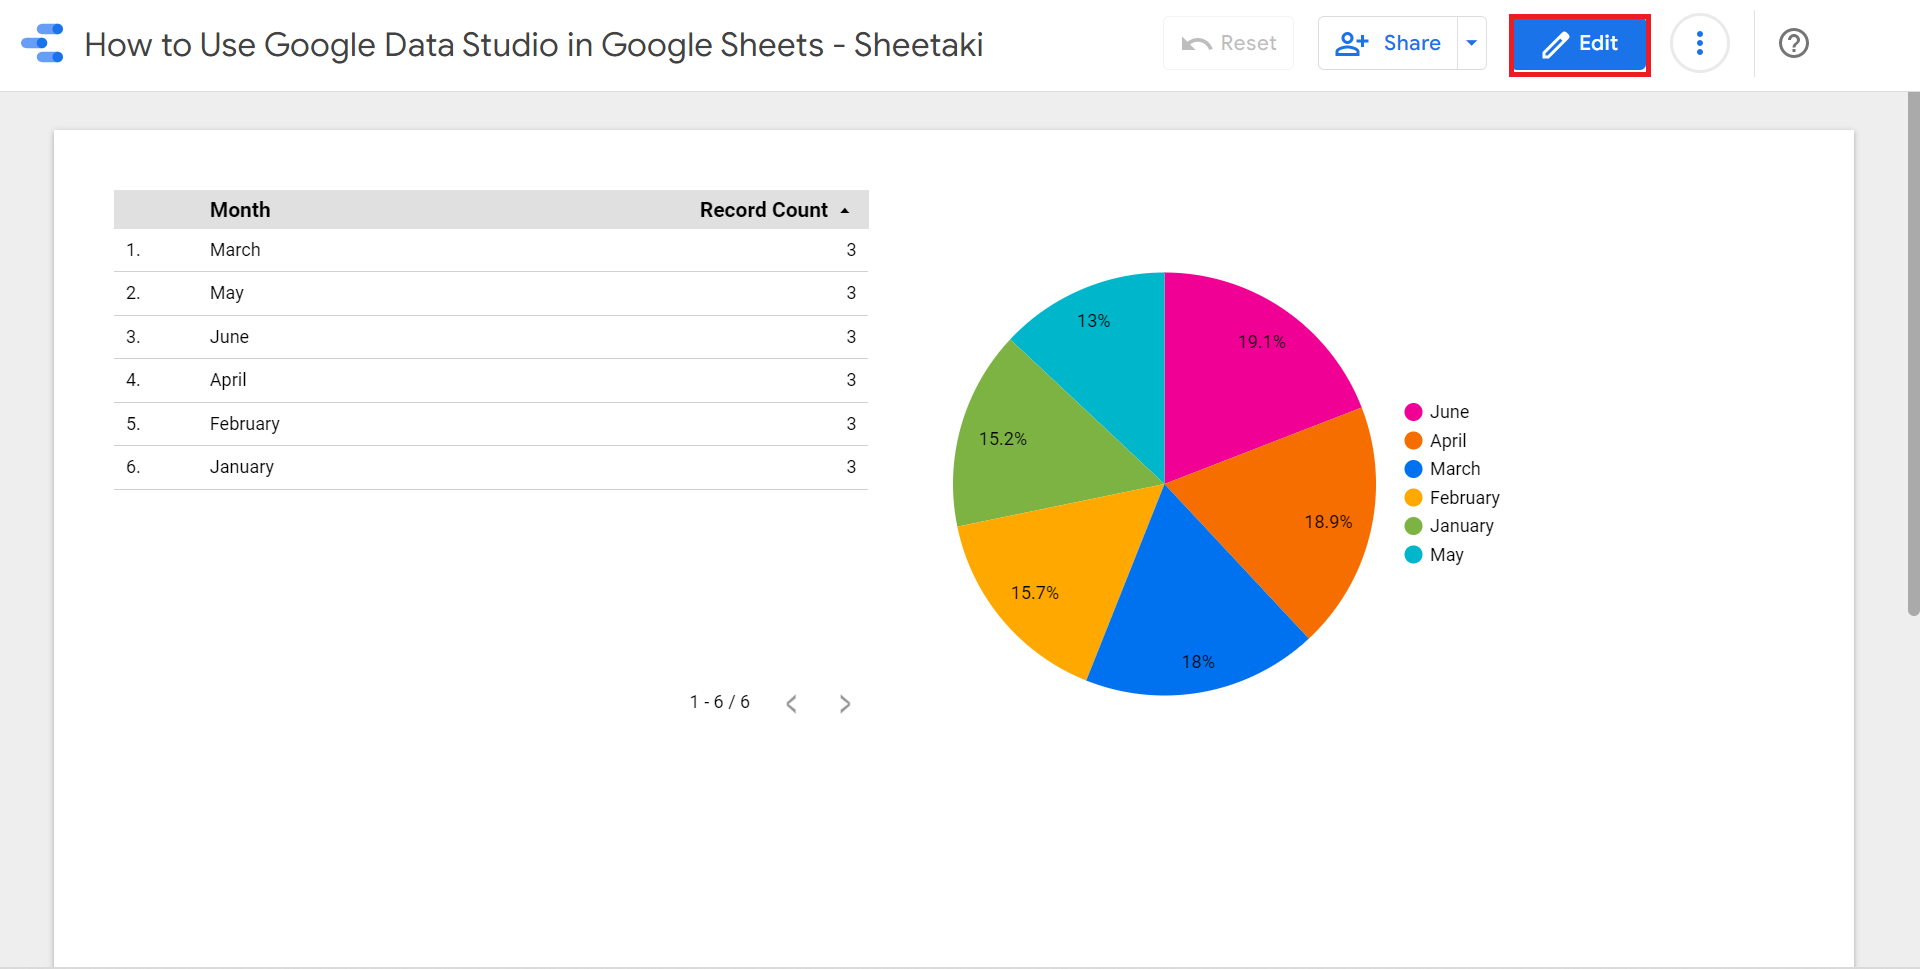 How to go back to edit mode in Google Data Studio